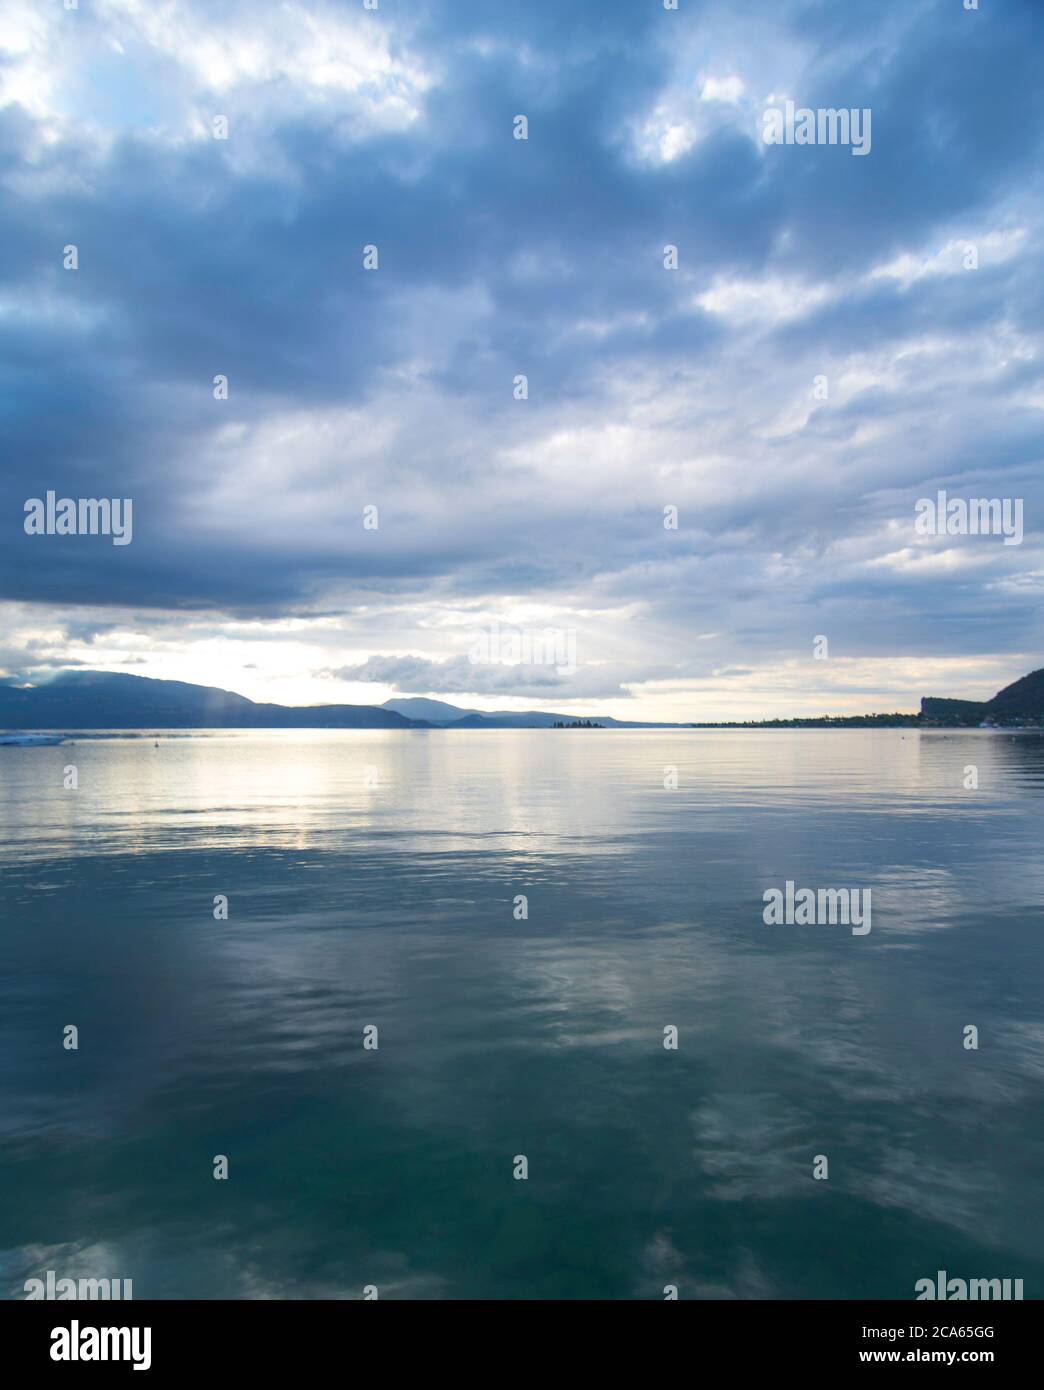 View of Lake Garda in the early morning or evening. The water is calm, the sky is partly cloudy. Small boats dance on the water. The mood is dreamy. Stock Photo